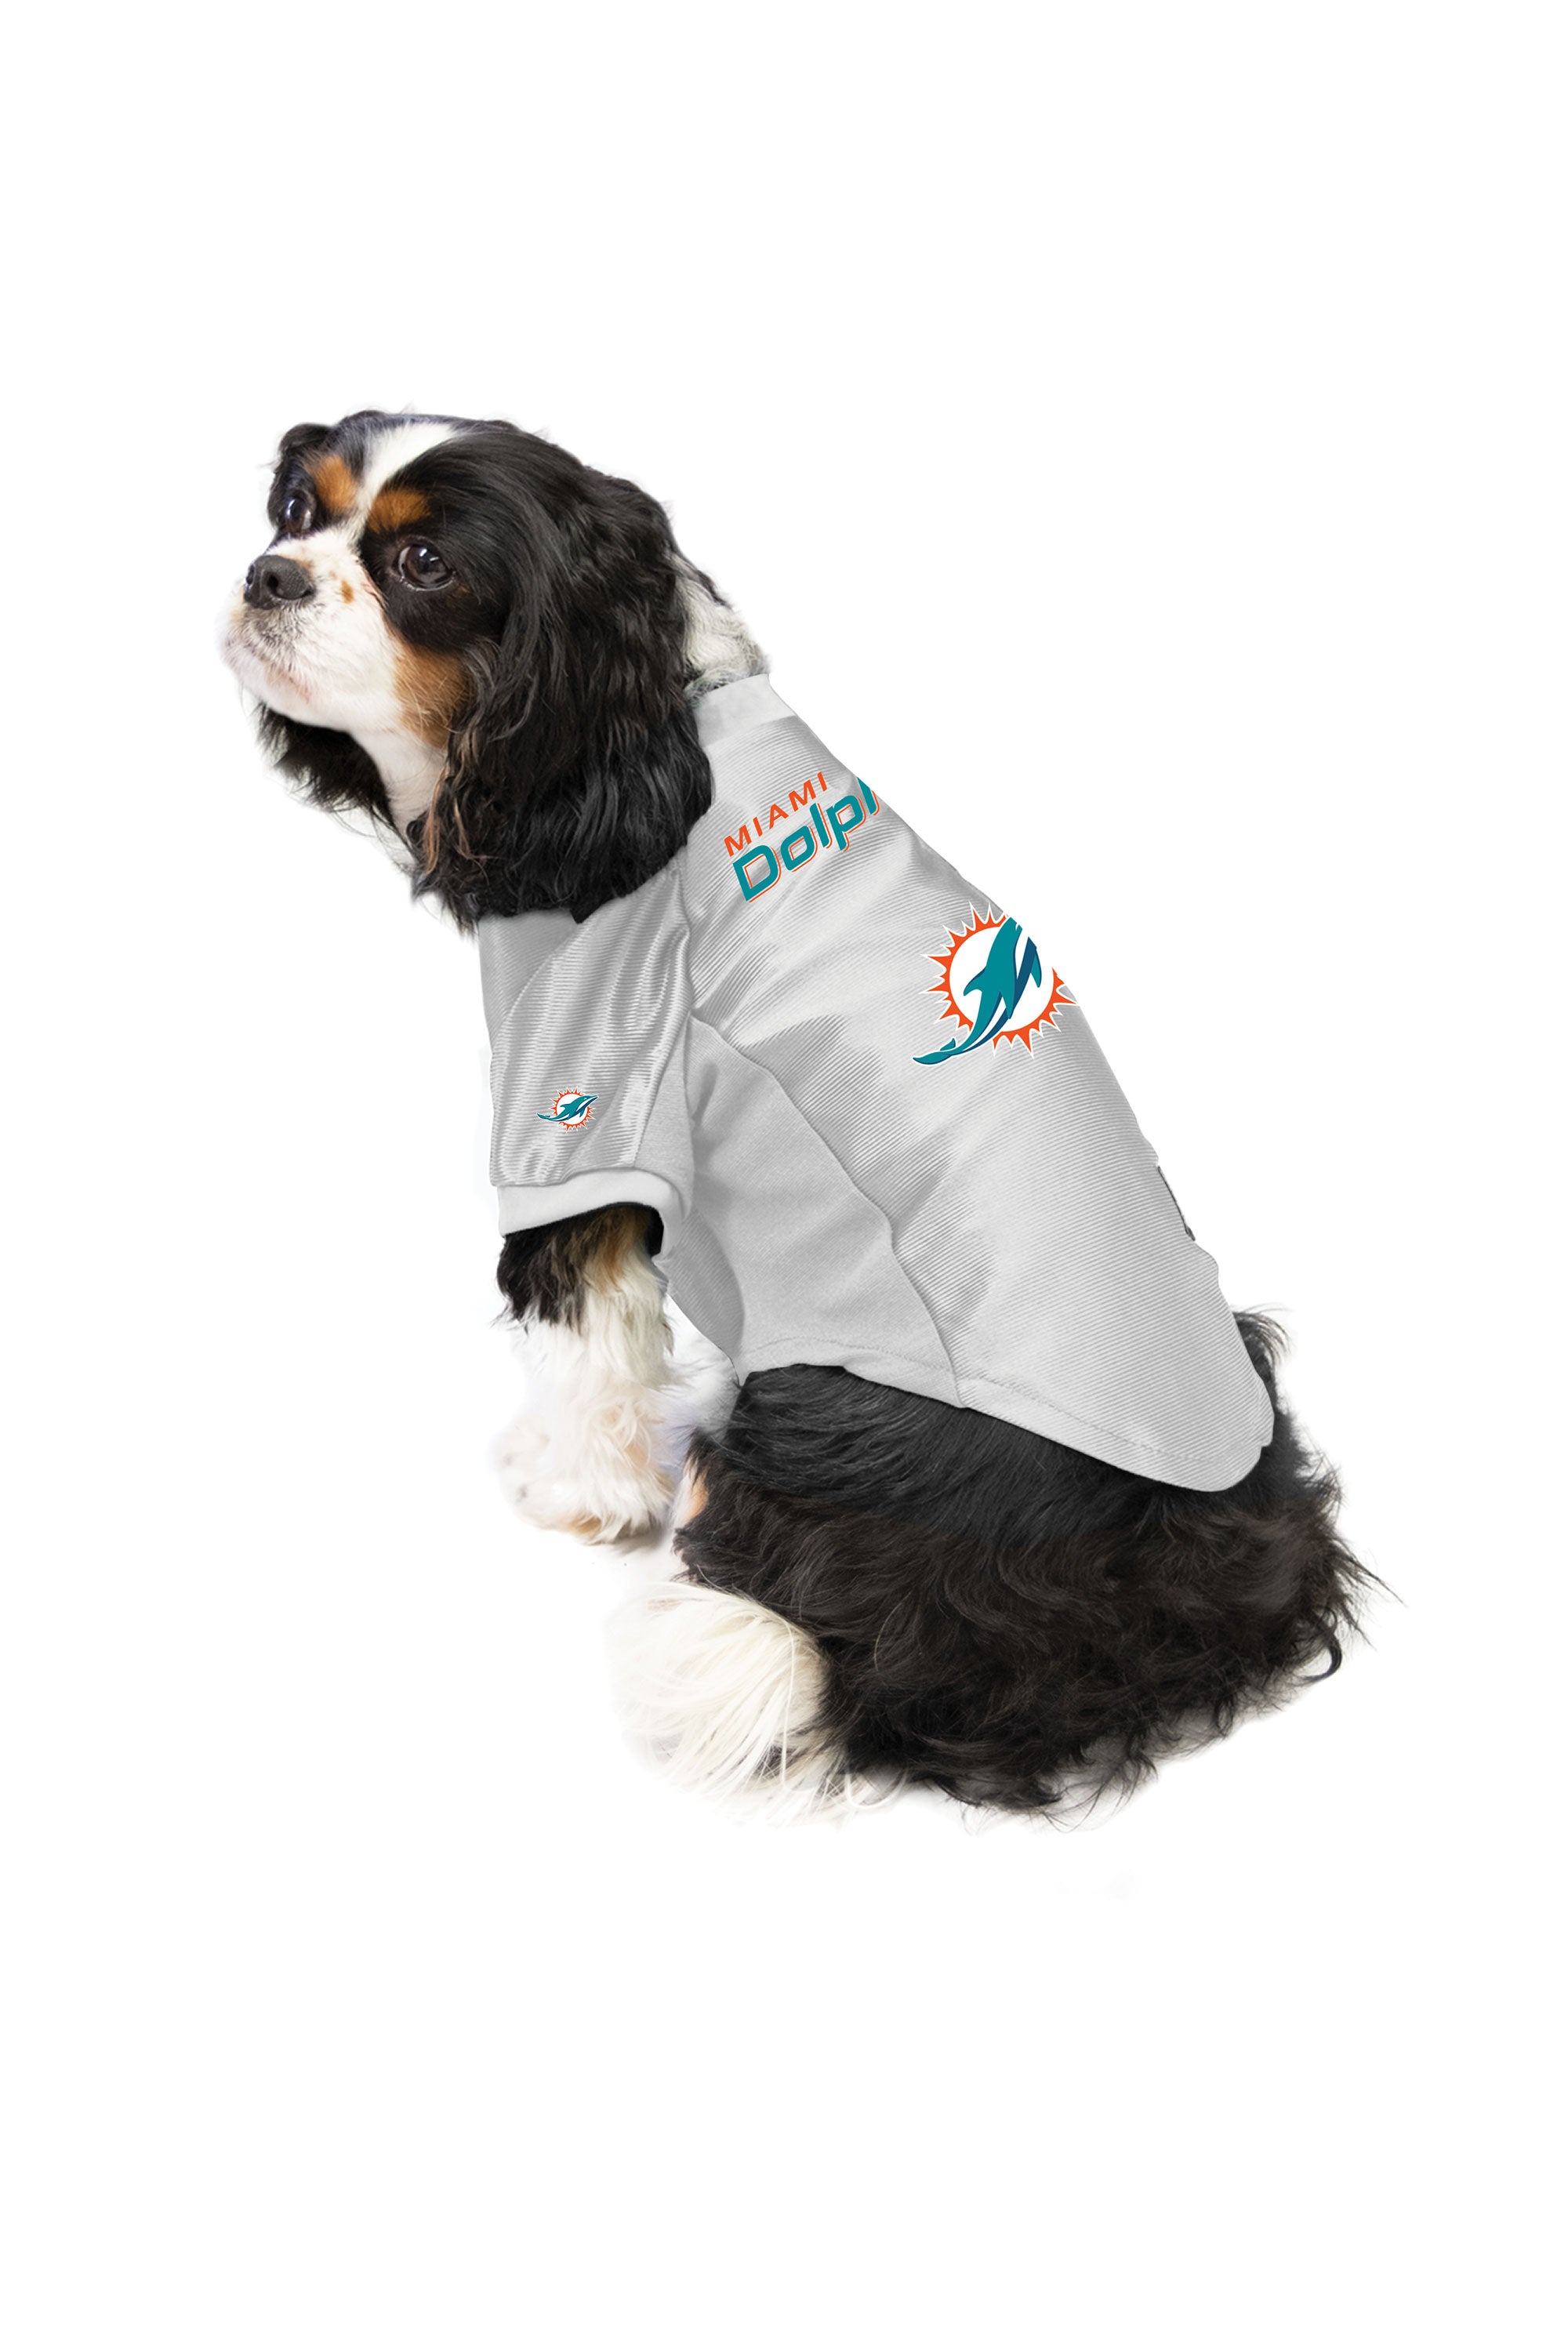 Pet Stretch Jersey | The Miami Dolphins